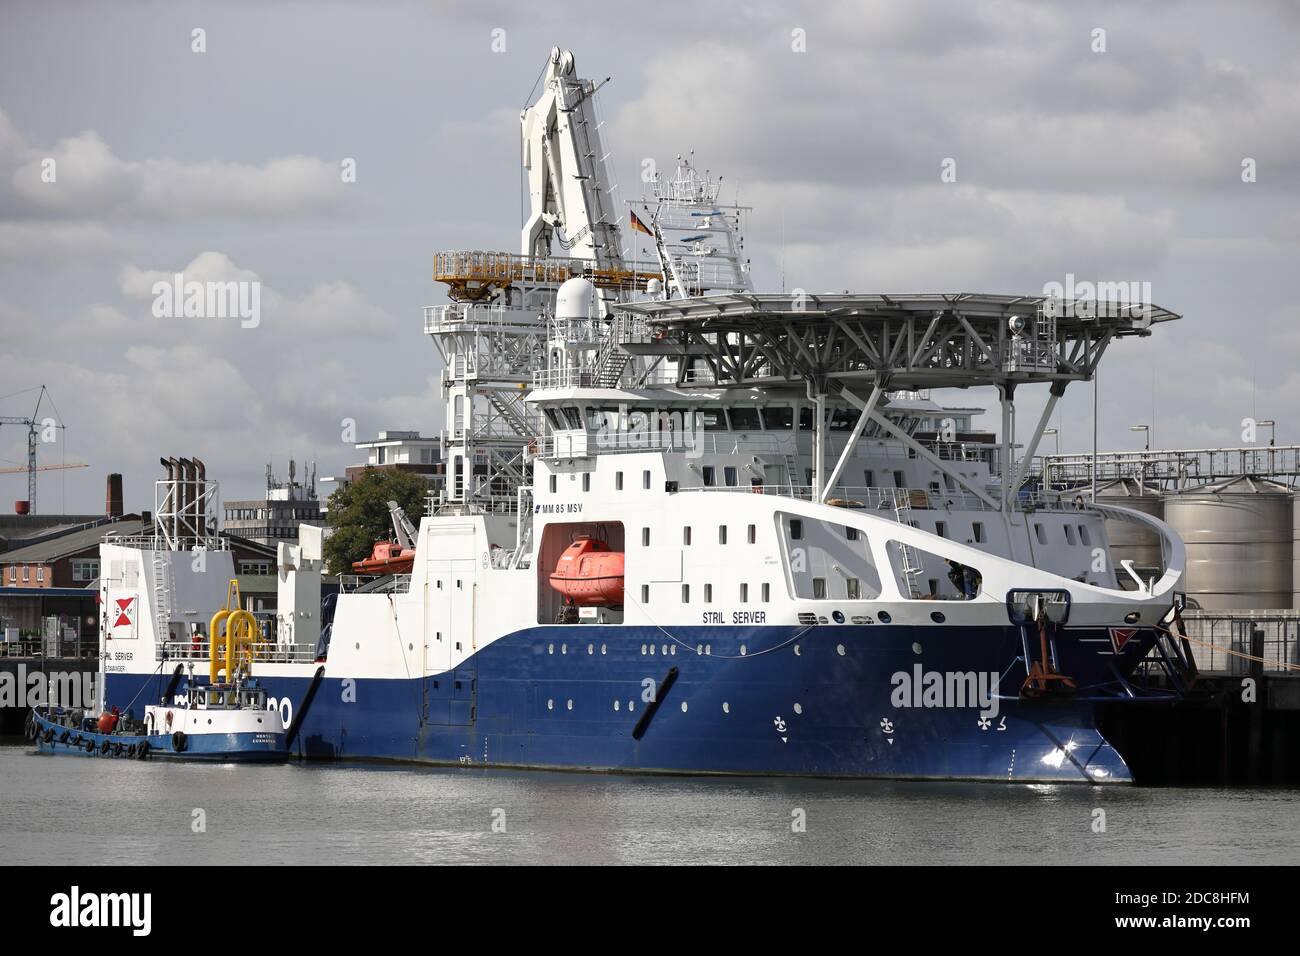 The offshore supply ship Stril Server will be in the port of Cuxhaven on August 25, 2020. Stock Photo